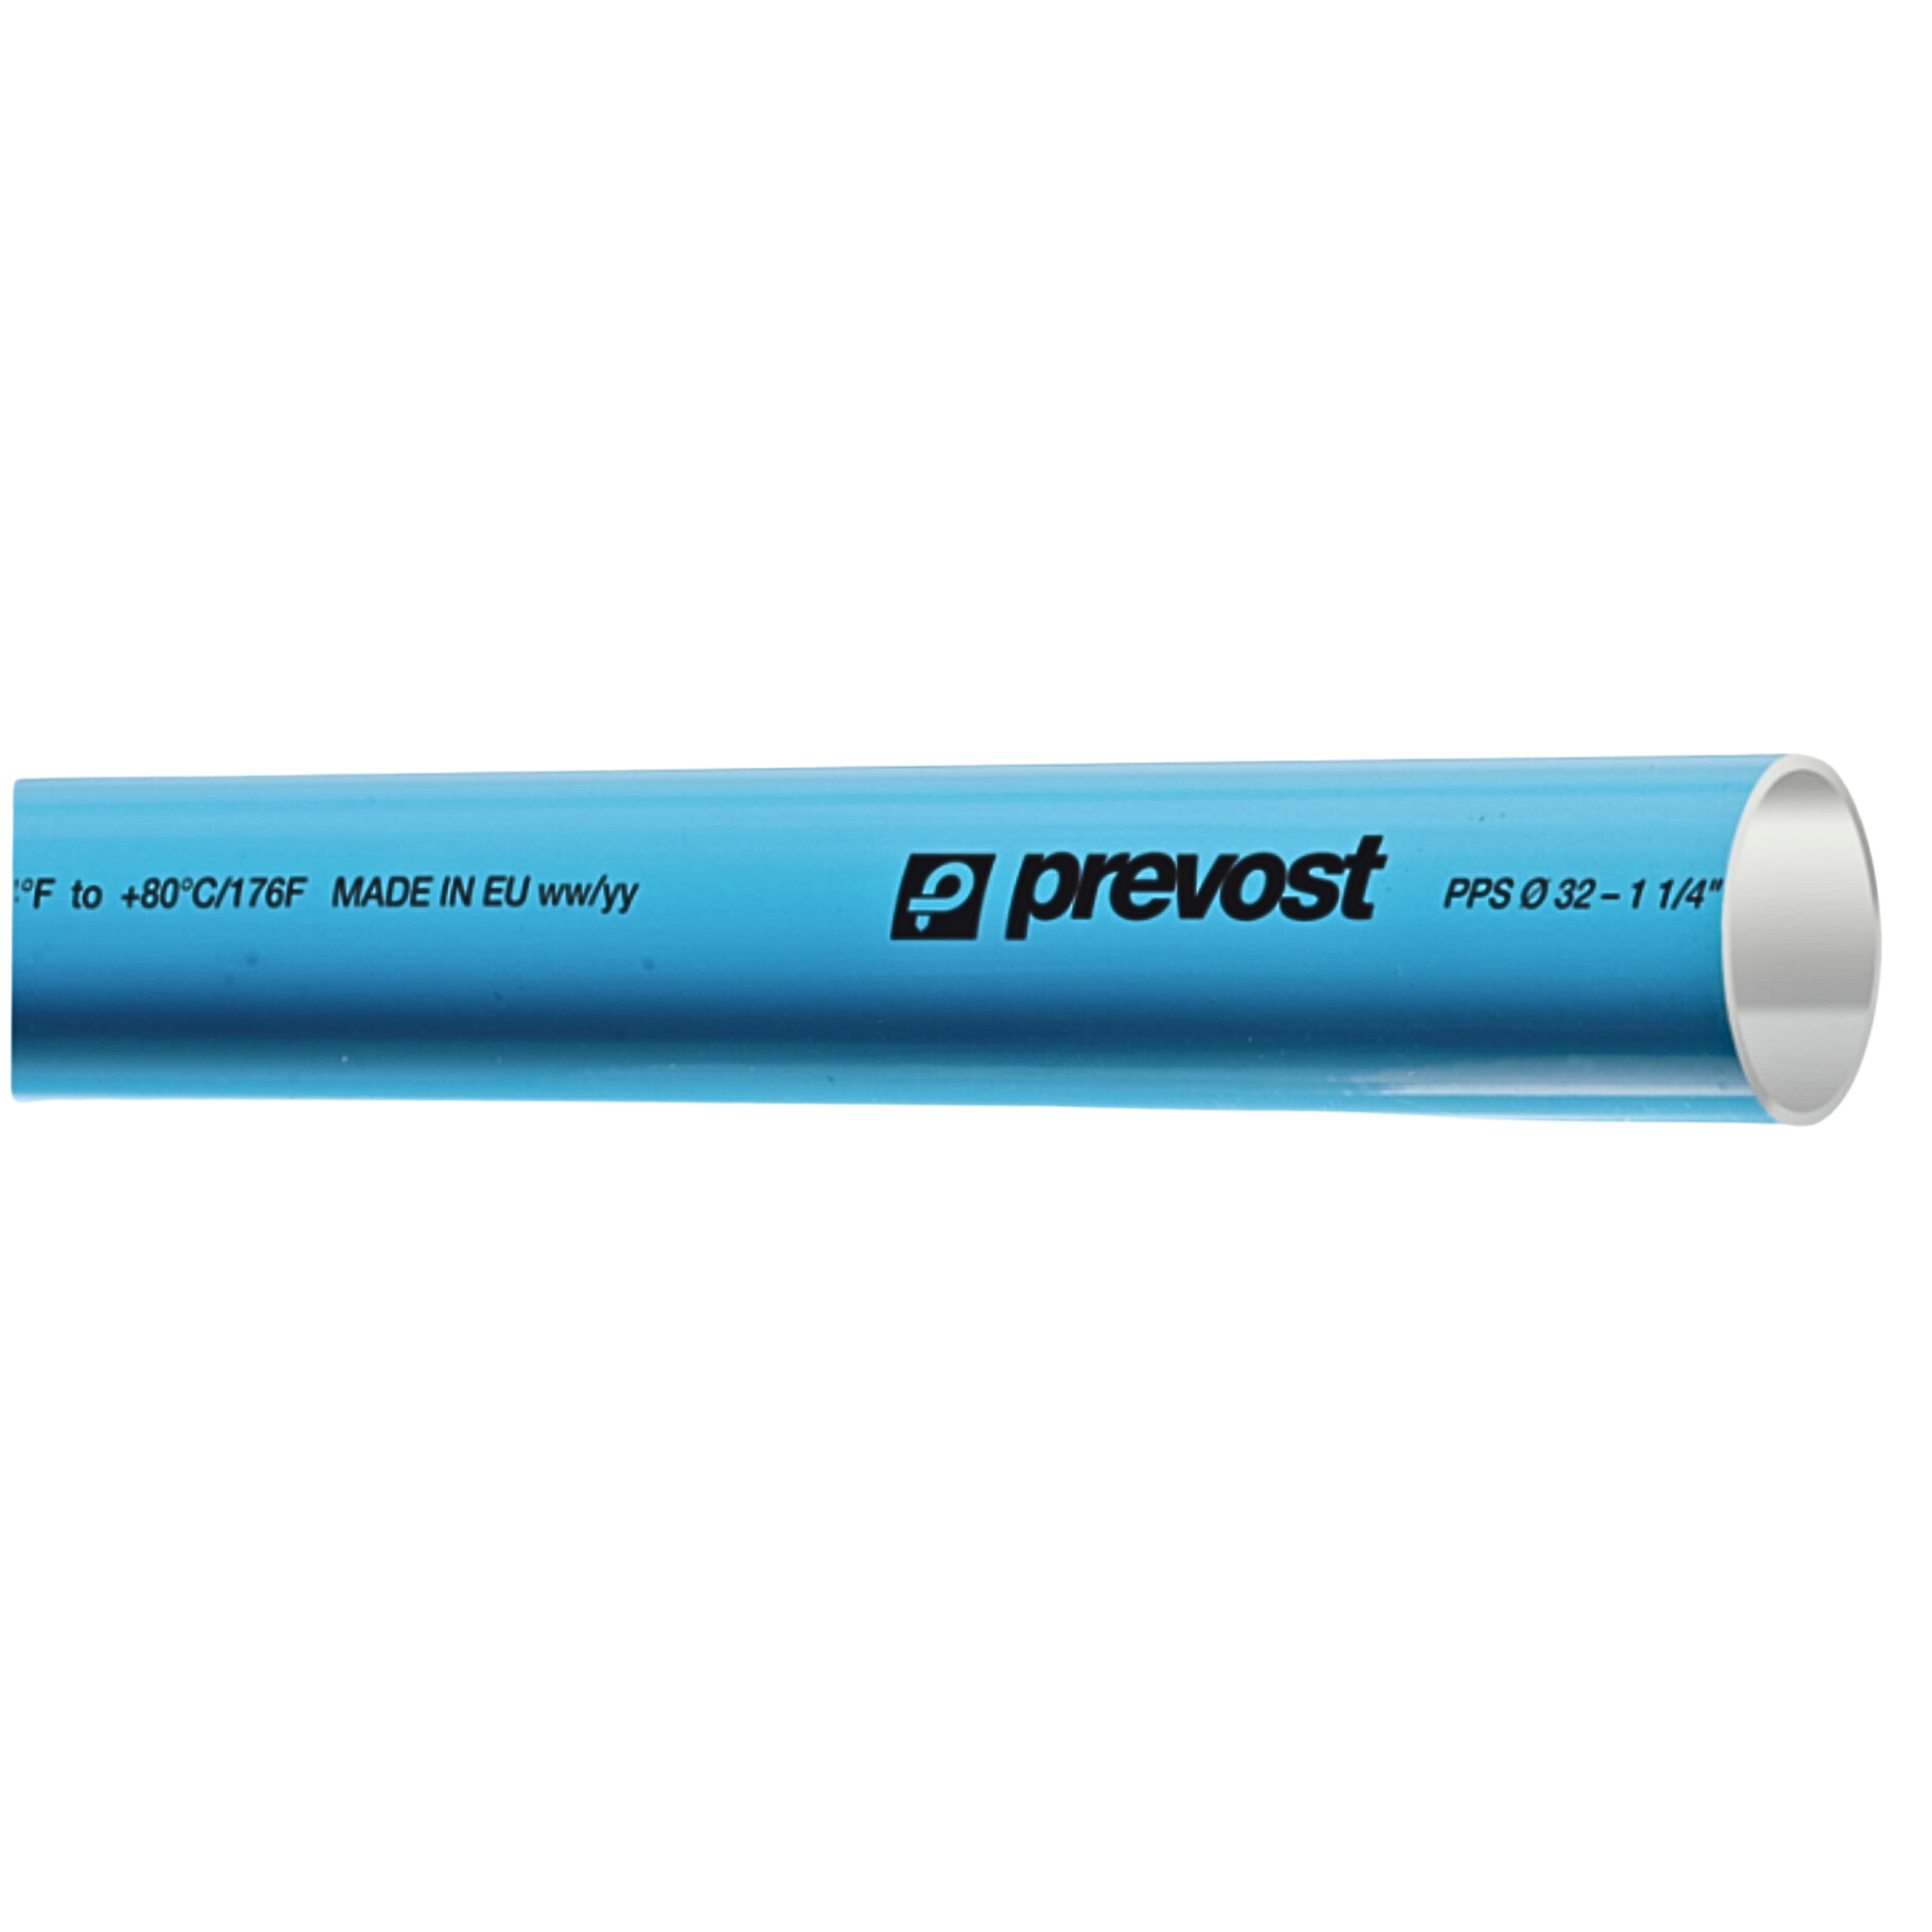 PPS - Aluminum 3/4" blue pipe for compressed air used on prevos1 product line